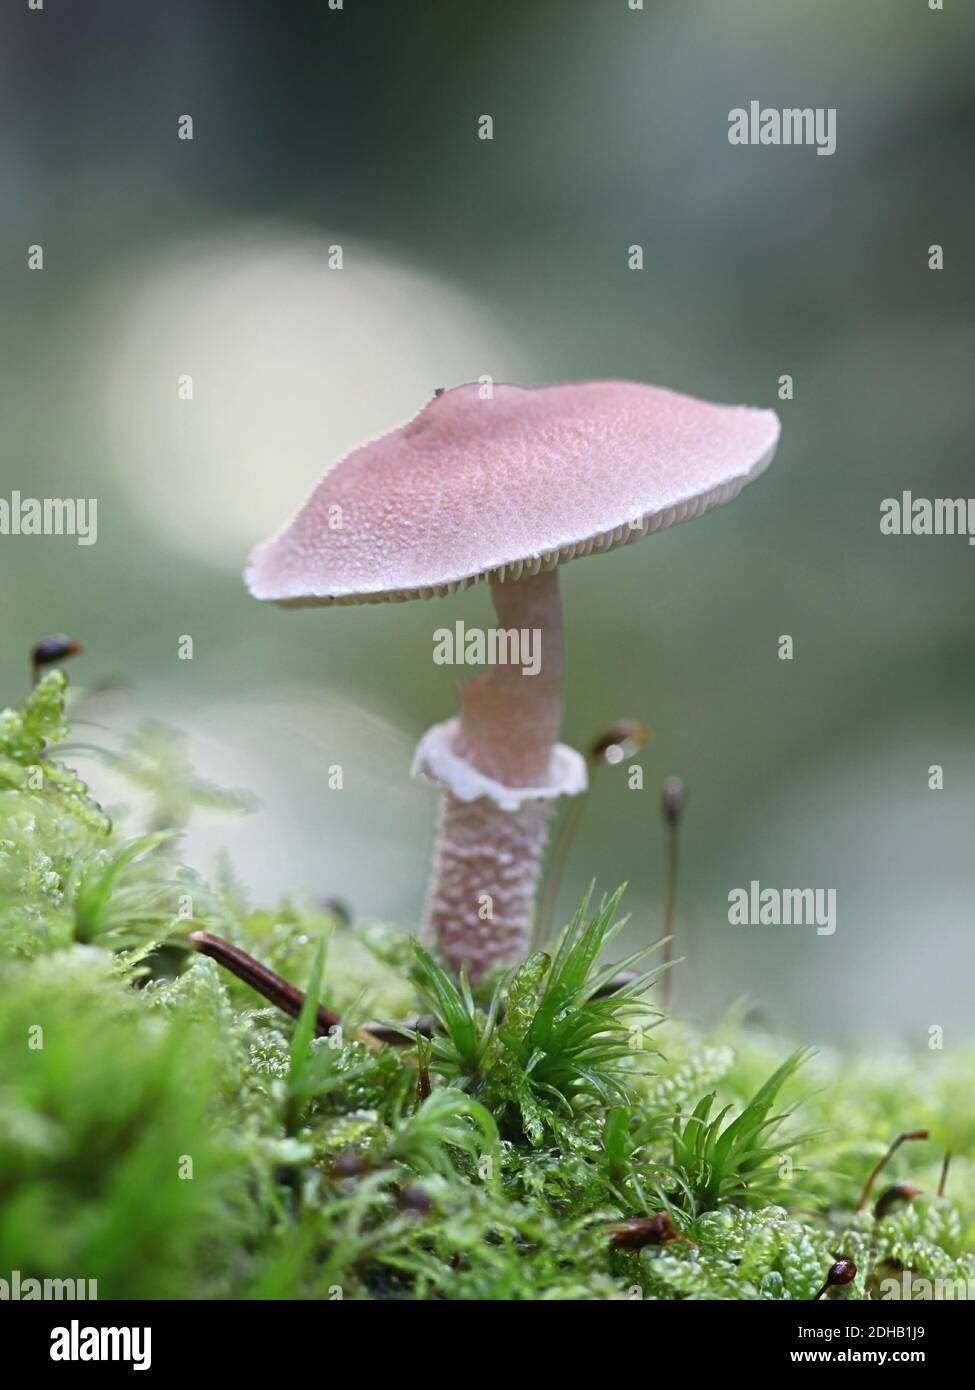 Cystoderma carcharias, known as the pearly powdercap, wild mushroom from Finland Stock Photo